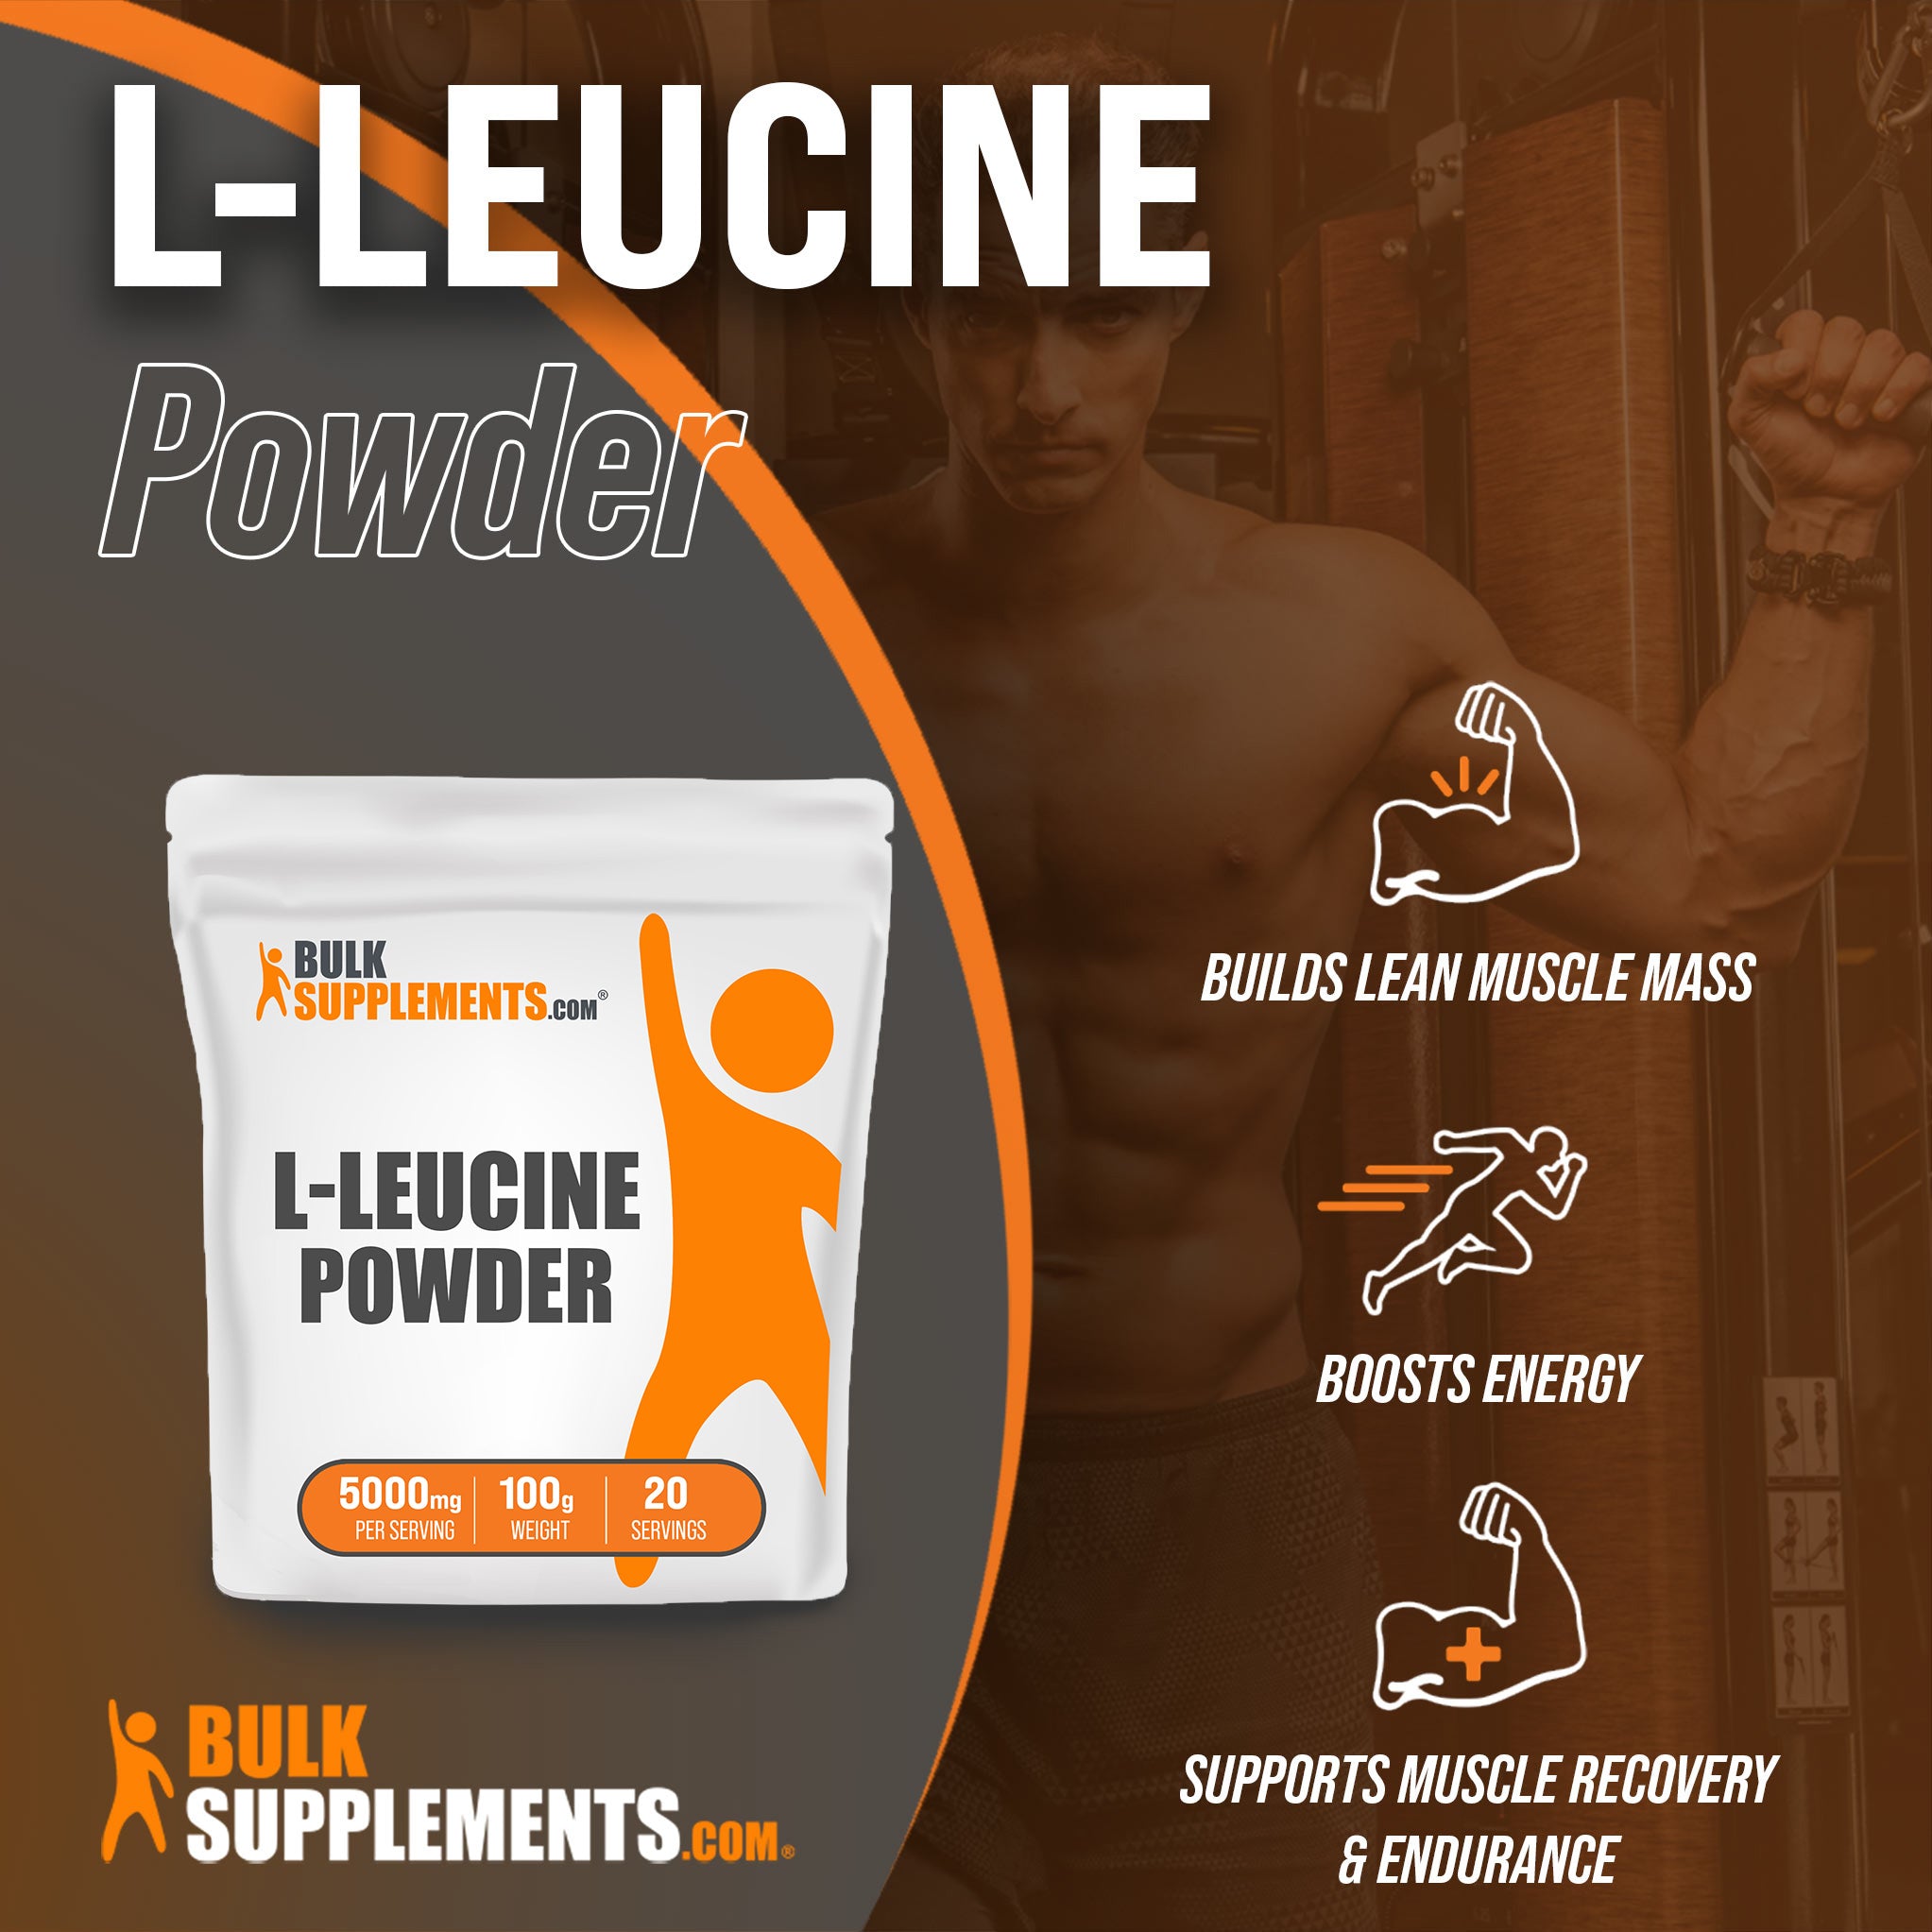 Benefits of L-Leucine: builds lean muscle mass, boosts energy, supports muscle recovery and endurance